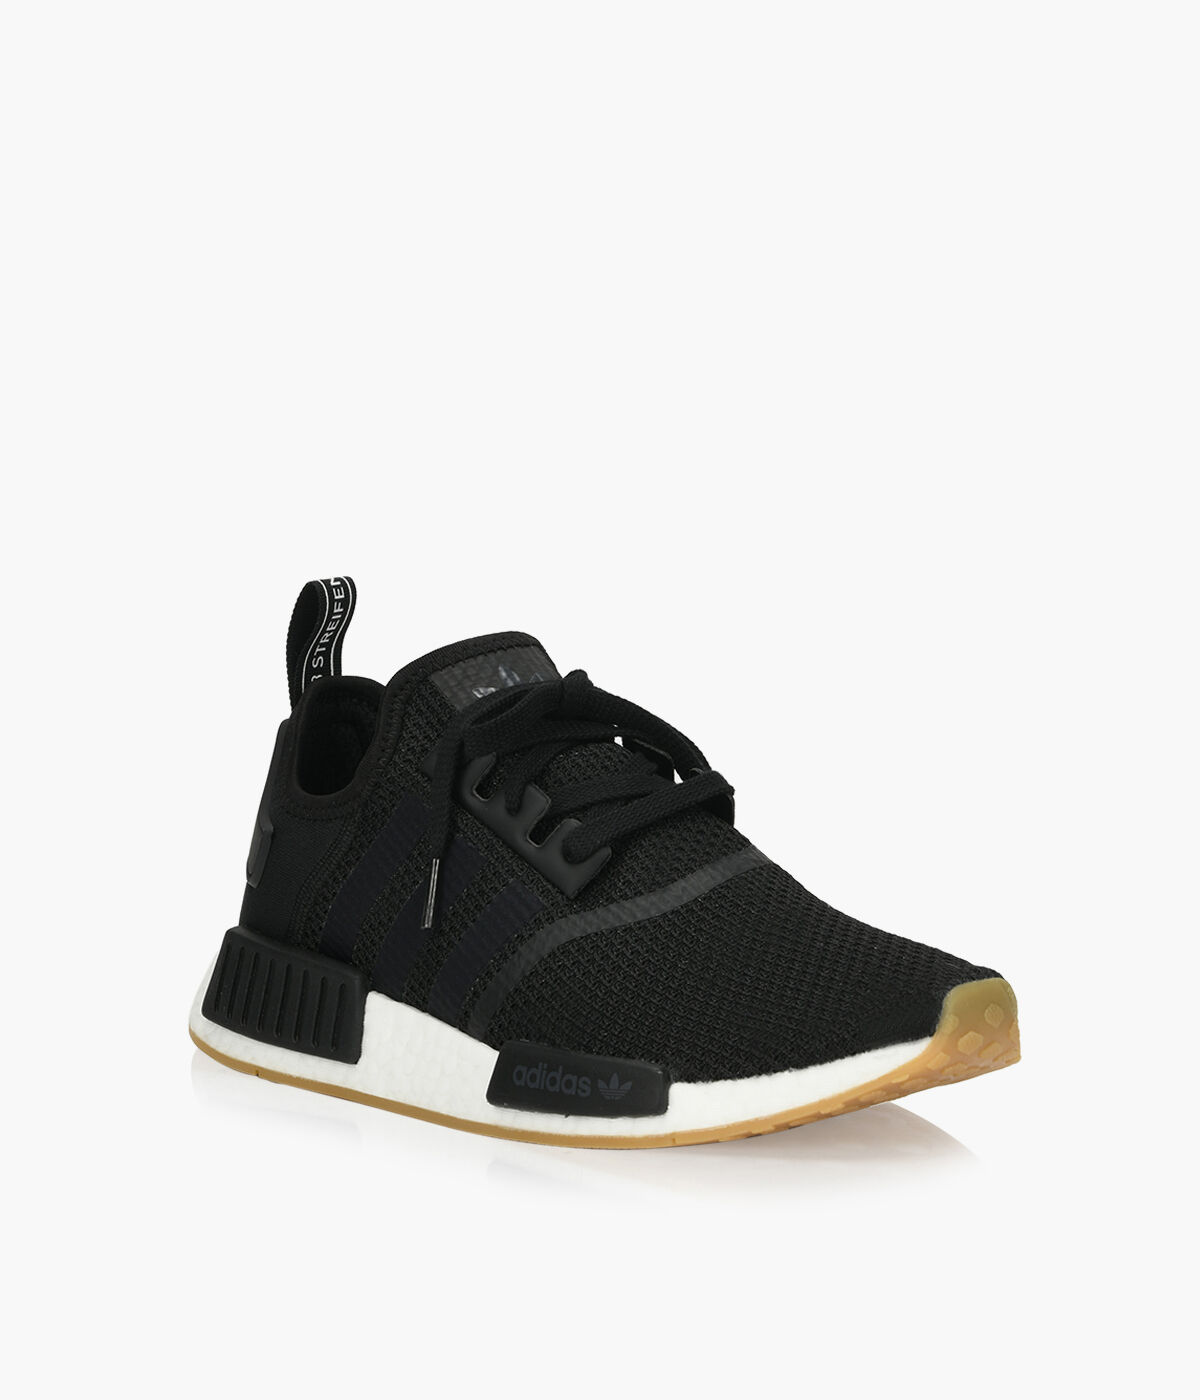 ADIDAS NMD R1 - Black Fabric | Browns Shoes